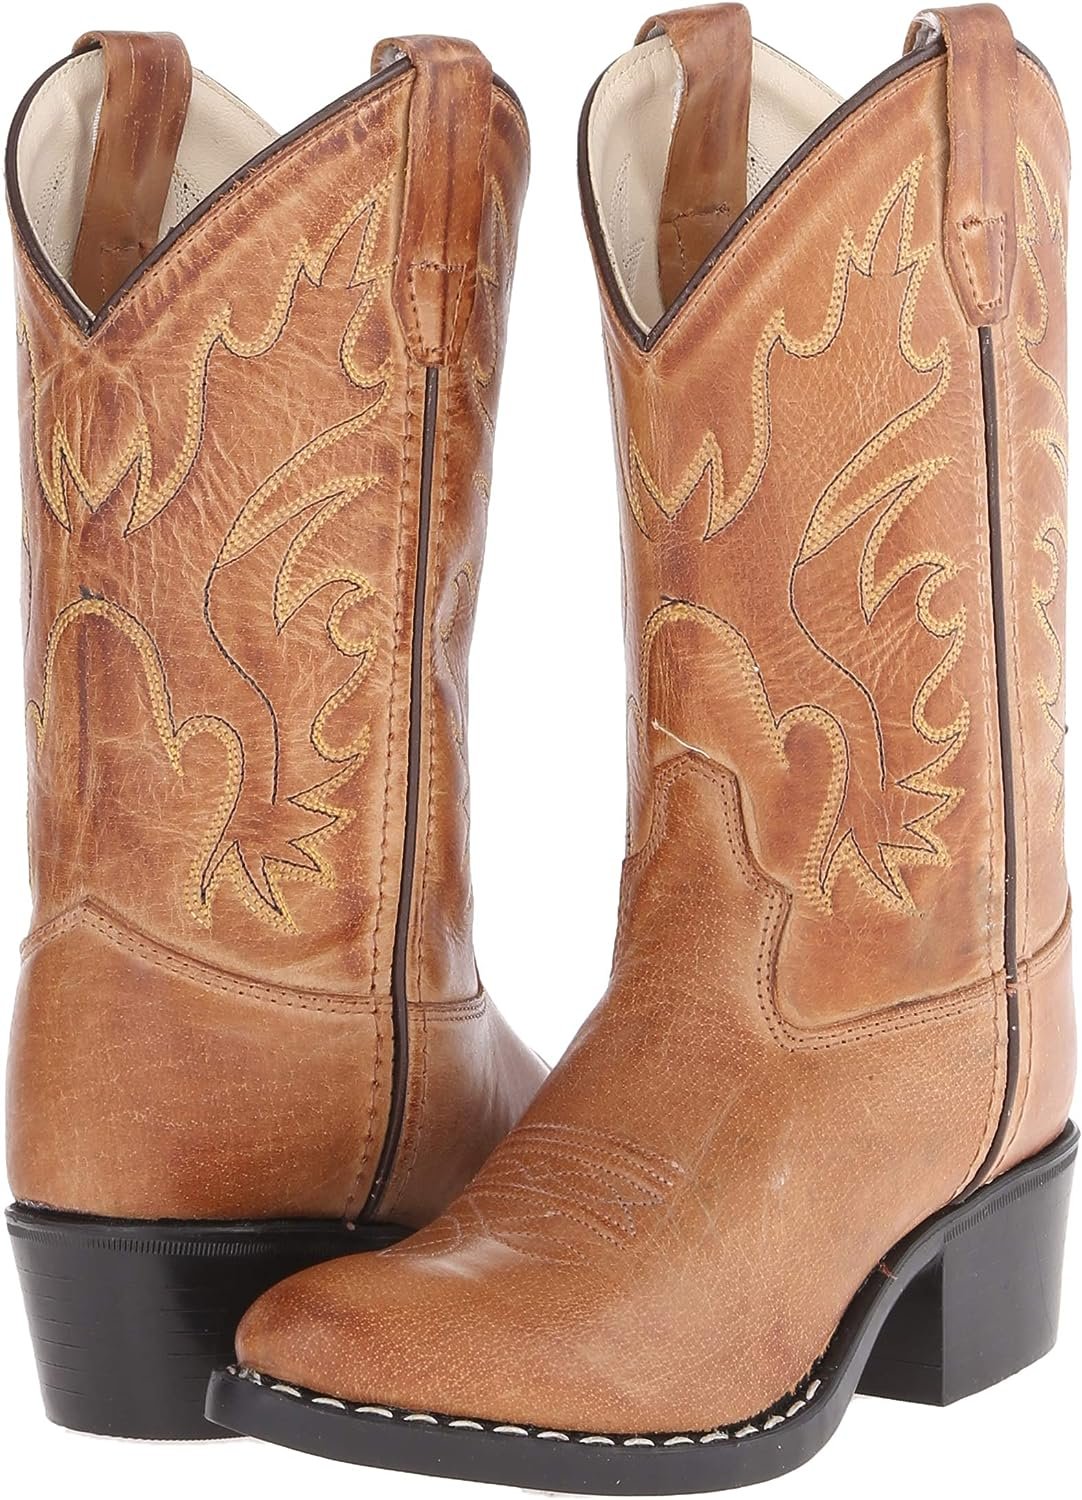 Old West Kids Boots Kid's Unisex-Child J Toe Leather Embroidered Western Boots, Tan Canyon, 2.5 US Little